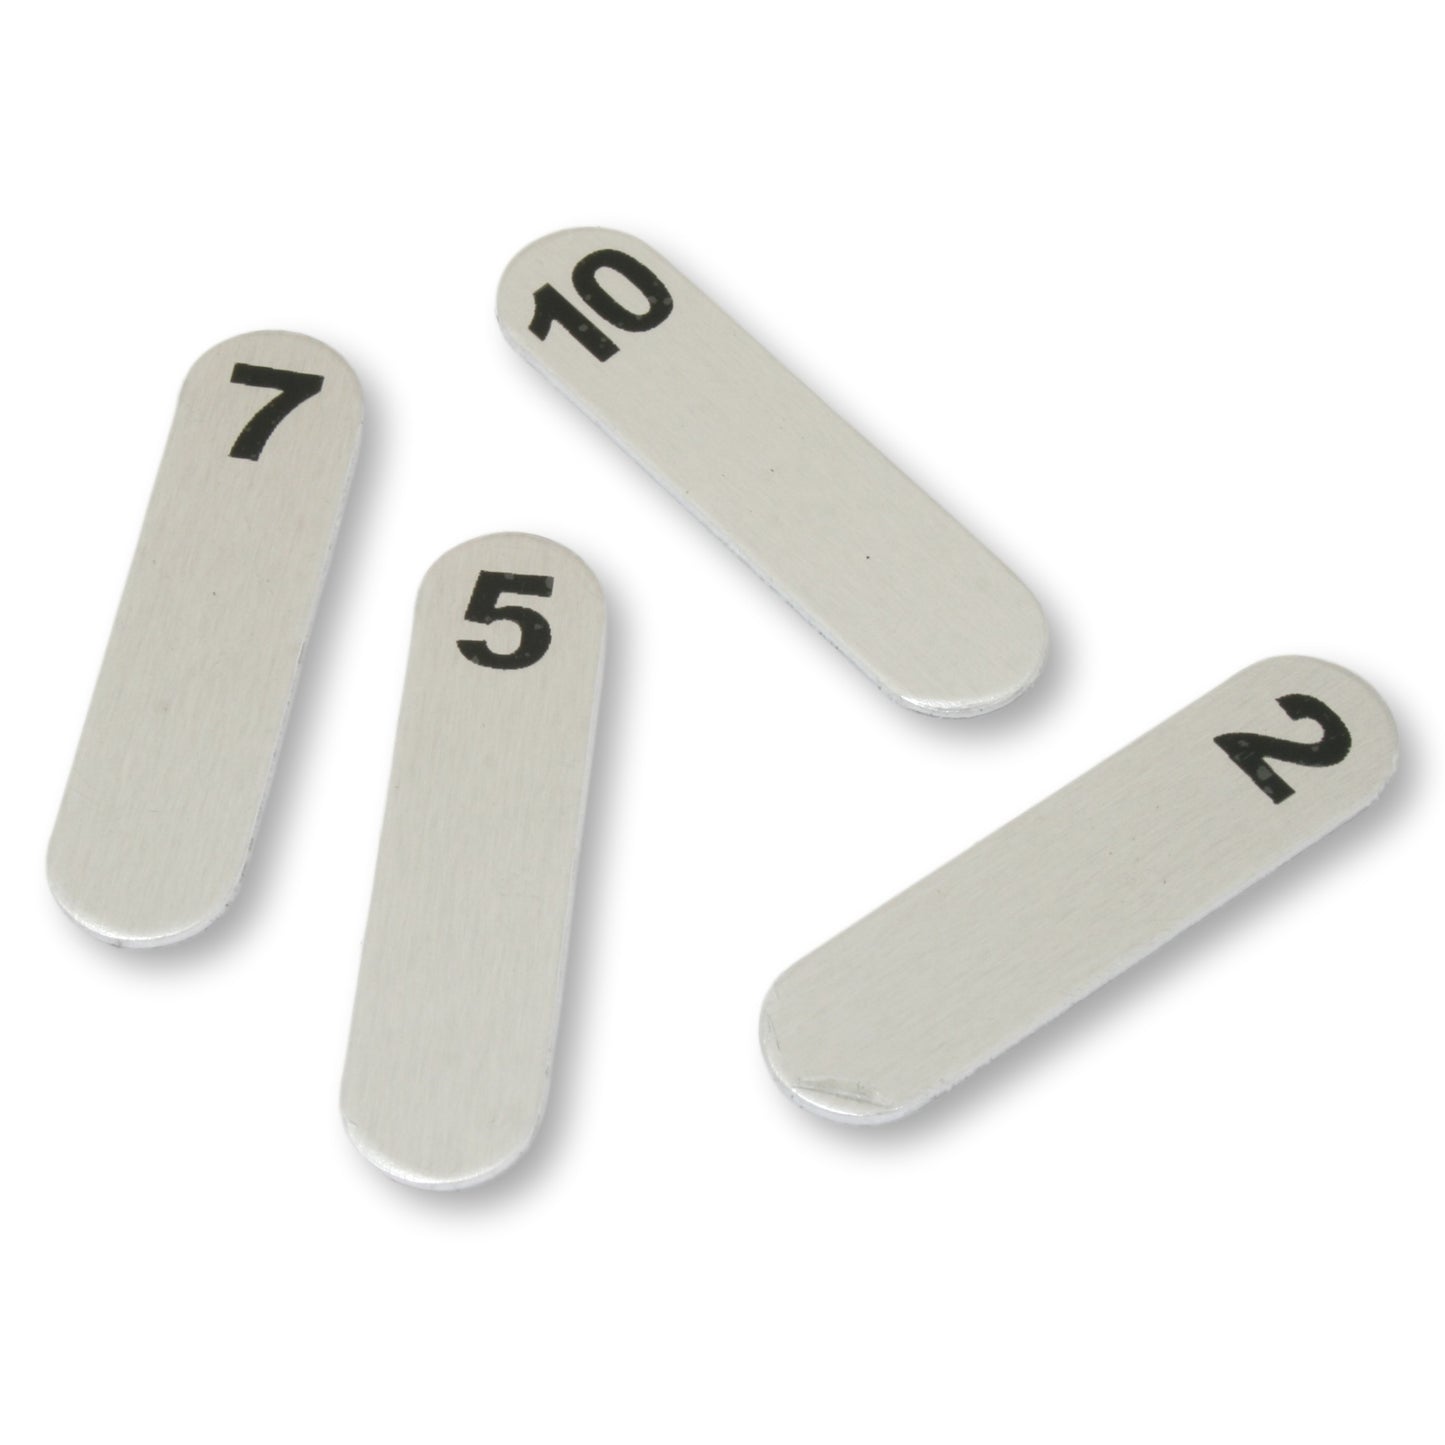 1-12 peg position finder pegs